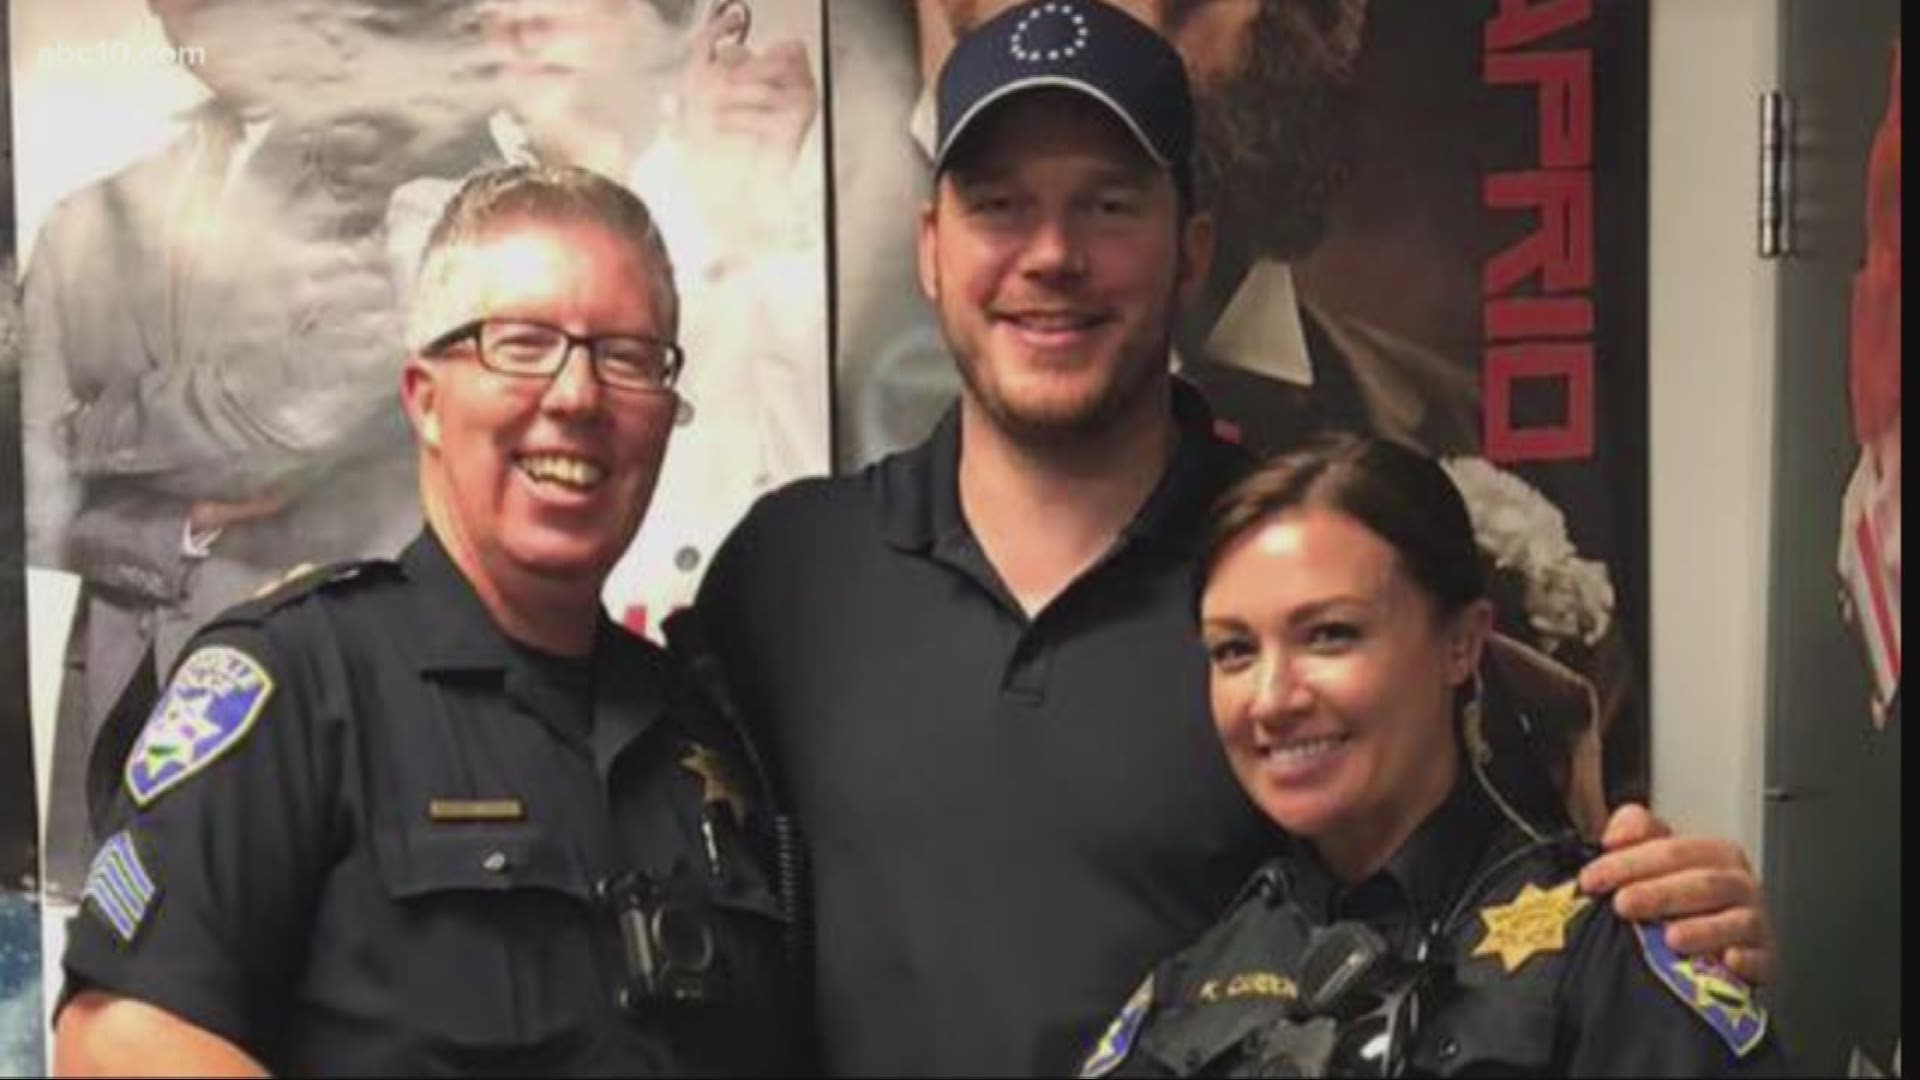 Chris Pratt, star of the new movie Jurassic World: Fallen Kingdom, surprised Solano County sheriff officers, their families and residents at a charity event at the Vacaville Brenden Theater.